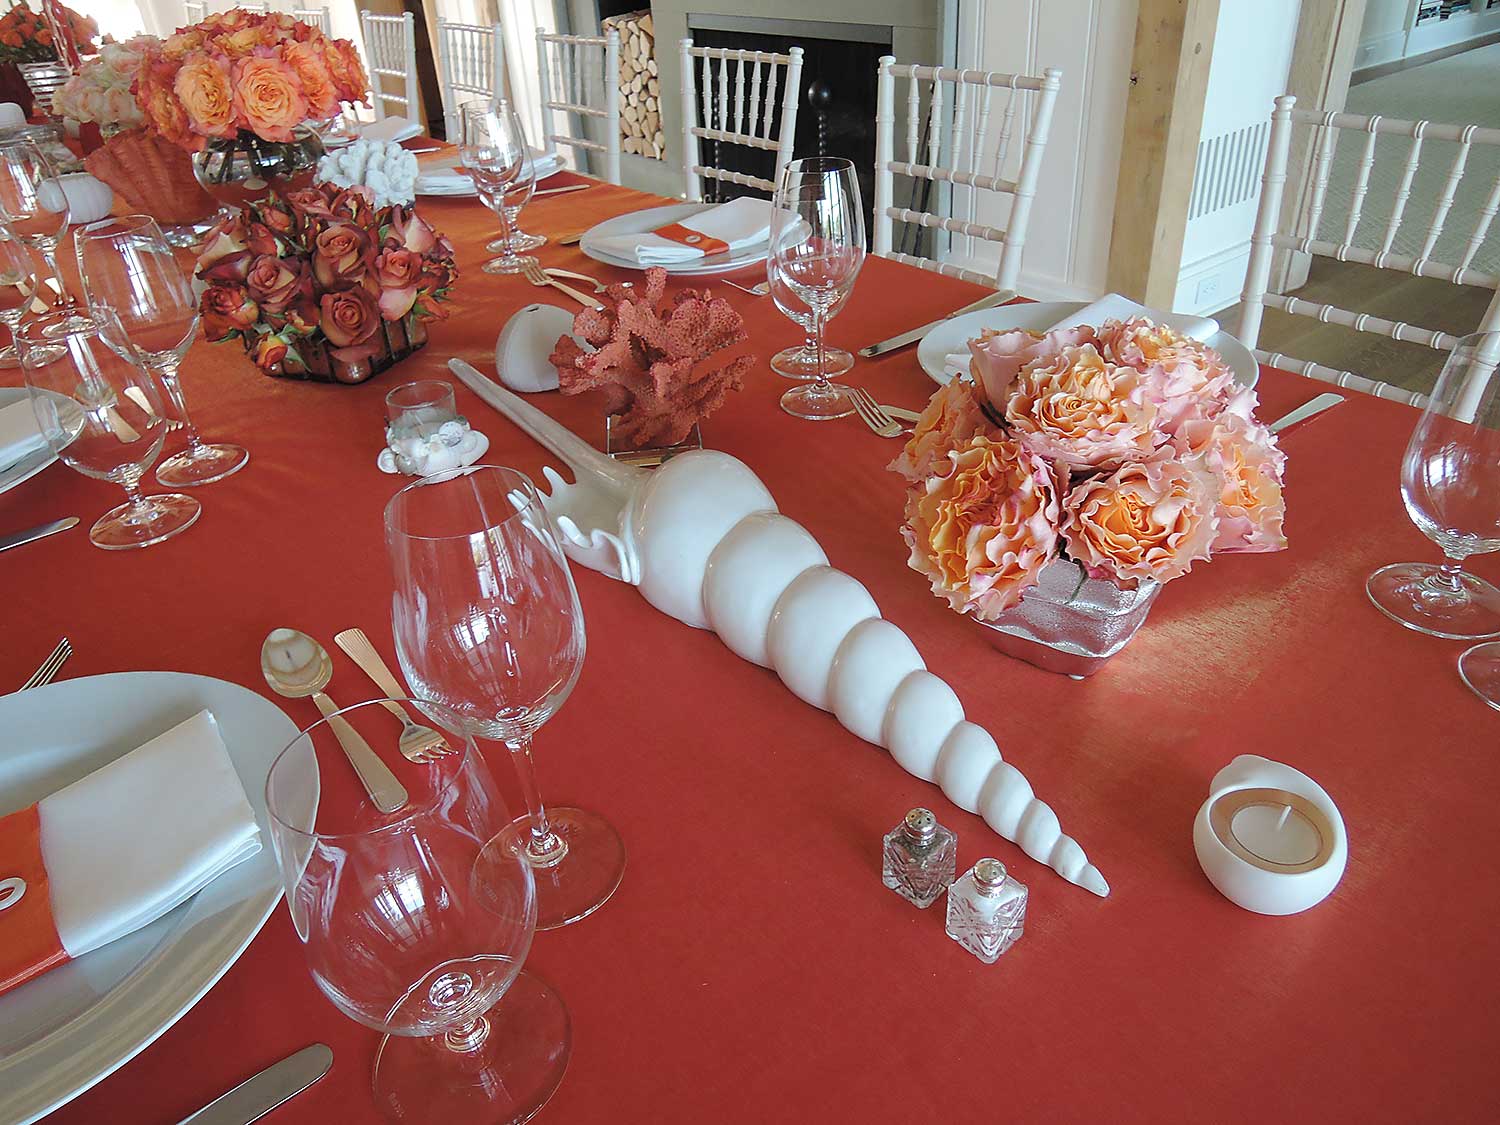  east hampton, ny, floral designer, florist, flower arrangement, coral, dinner party, home delivery, by appointment, hamptons, new york city, manhattan 